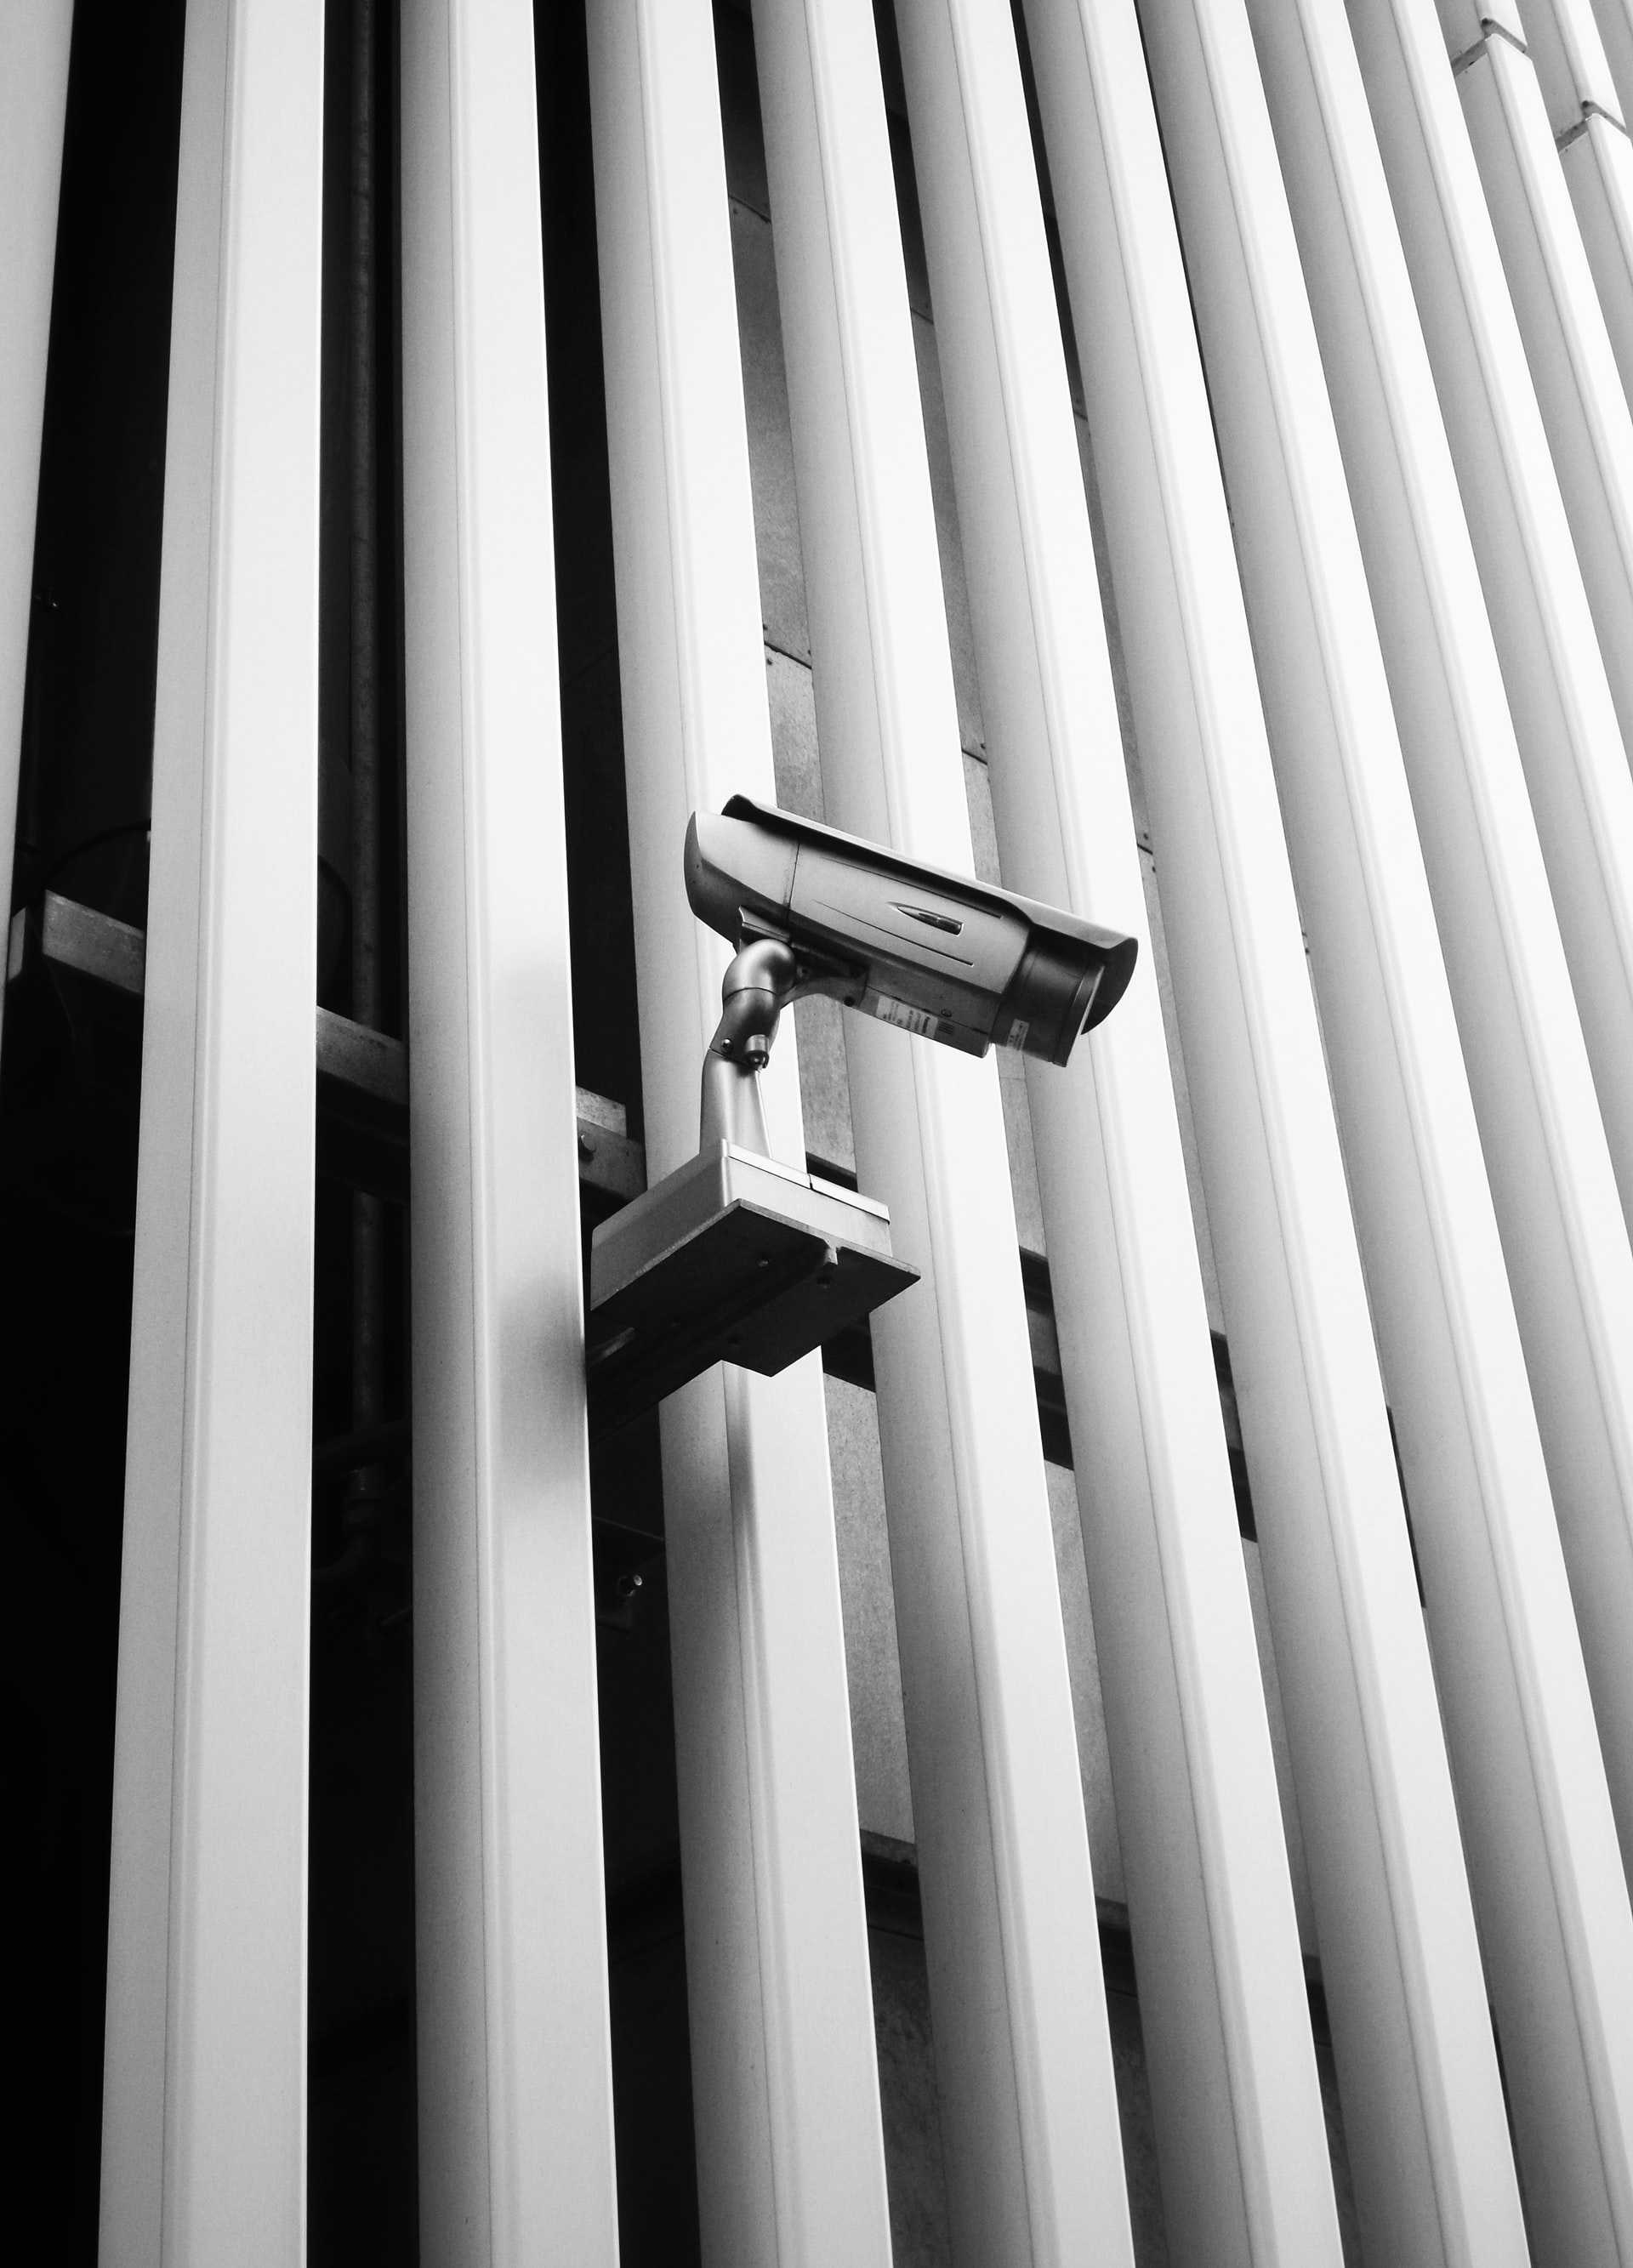 A surveillance camera juts out from a modern office building.